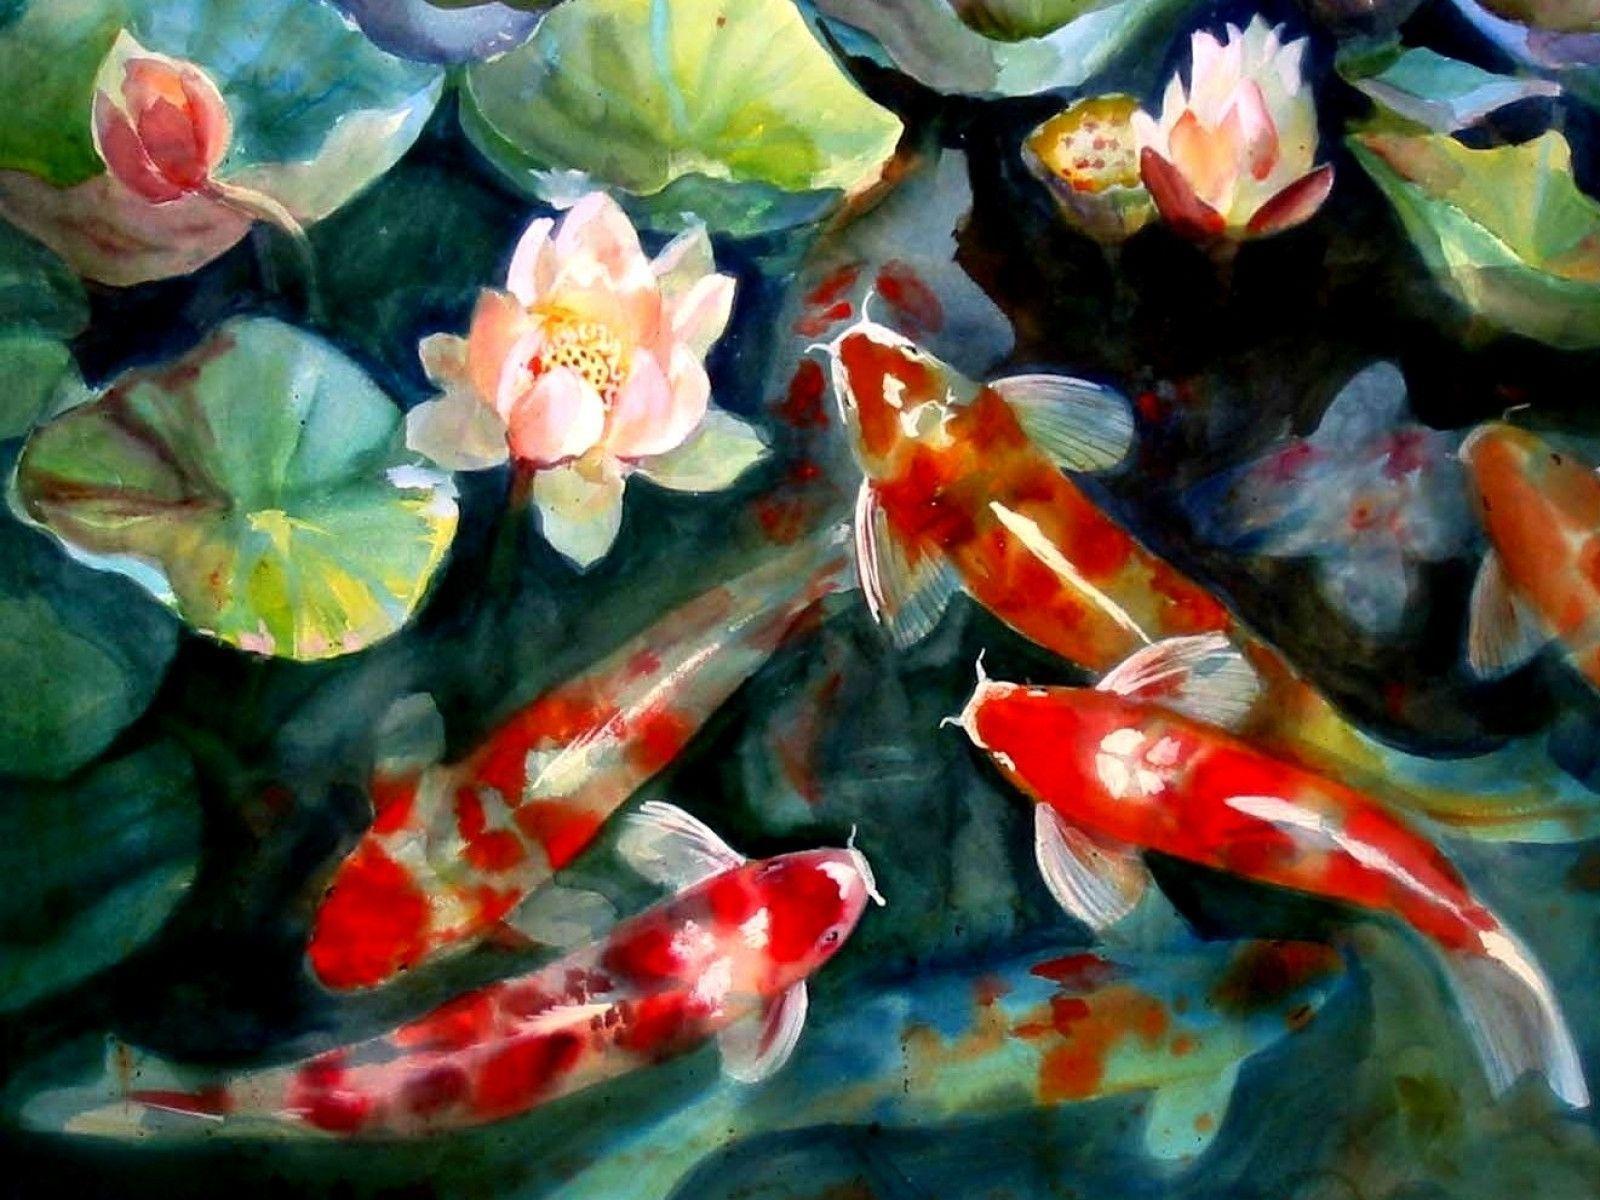 Gallery For Gt Koi Background